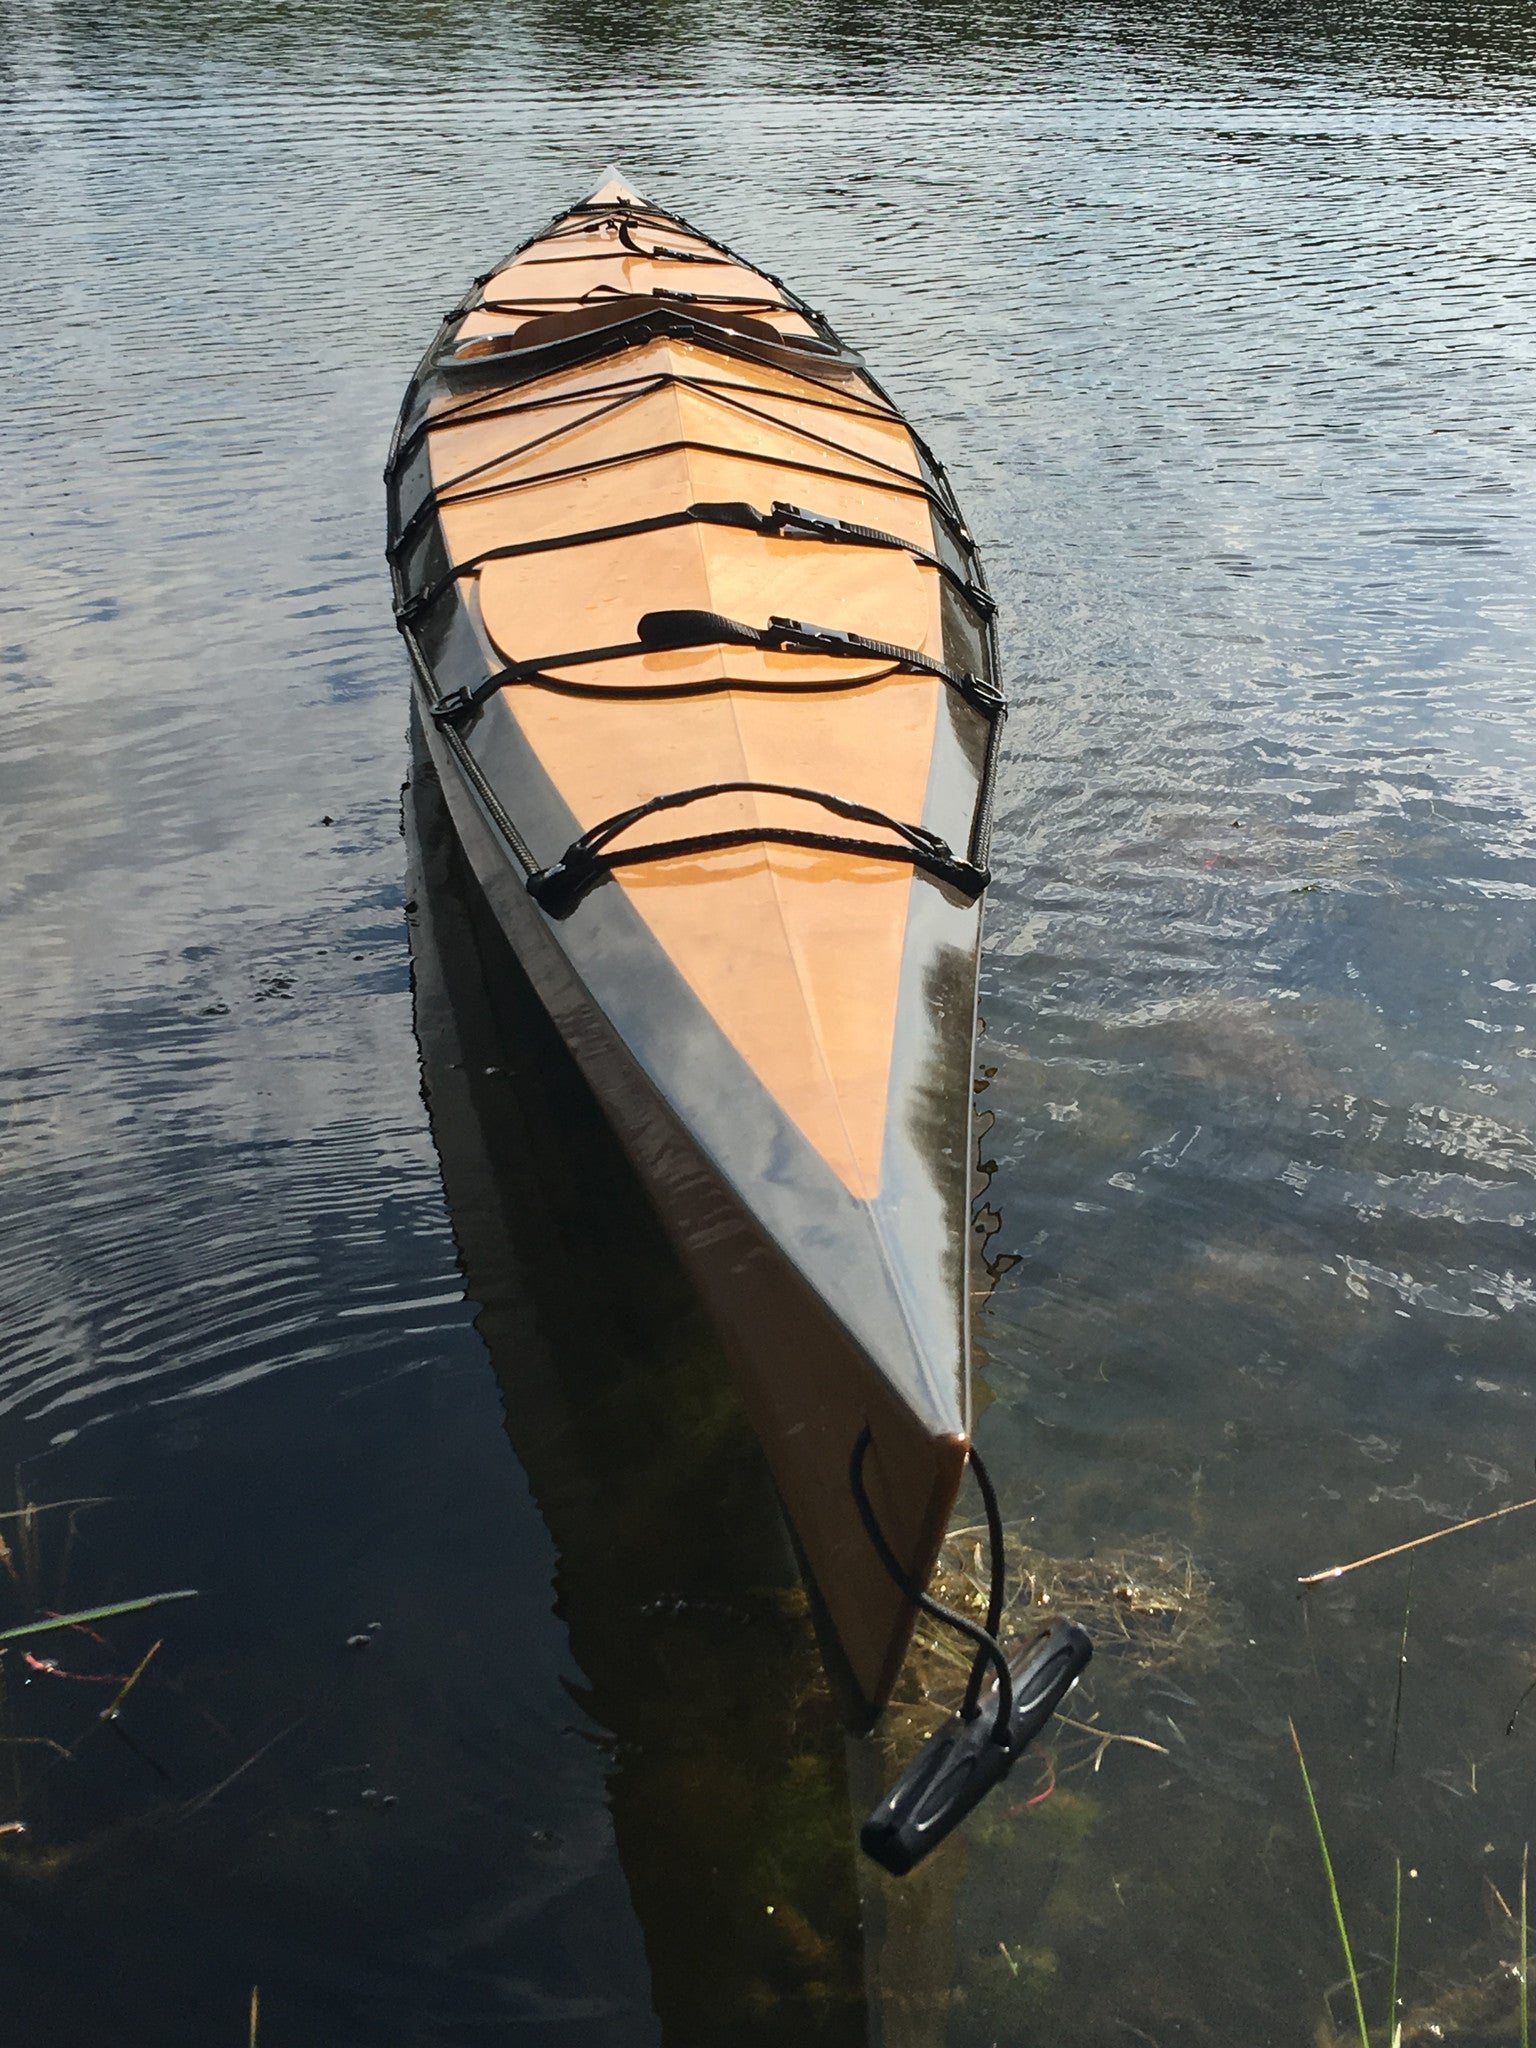 Bow shot of the Solace 16EX in a lake